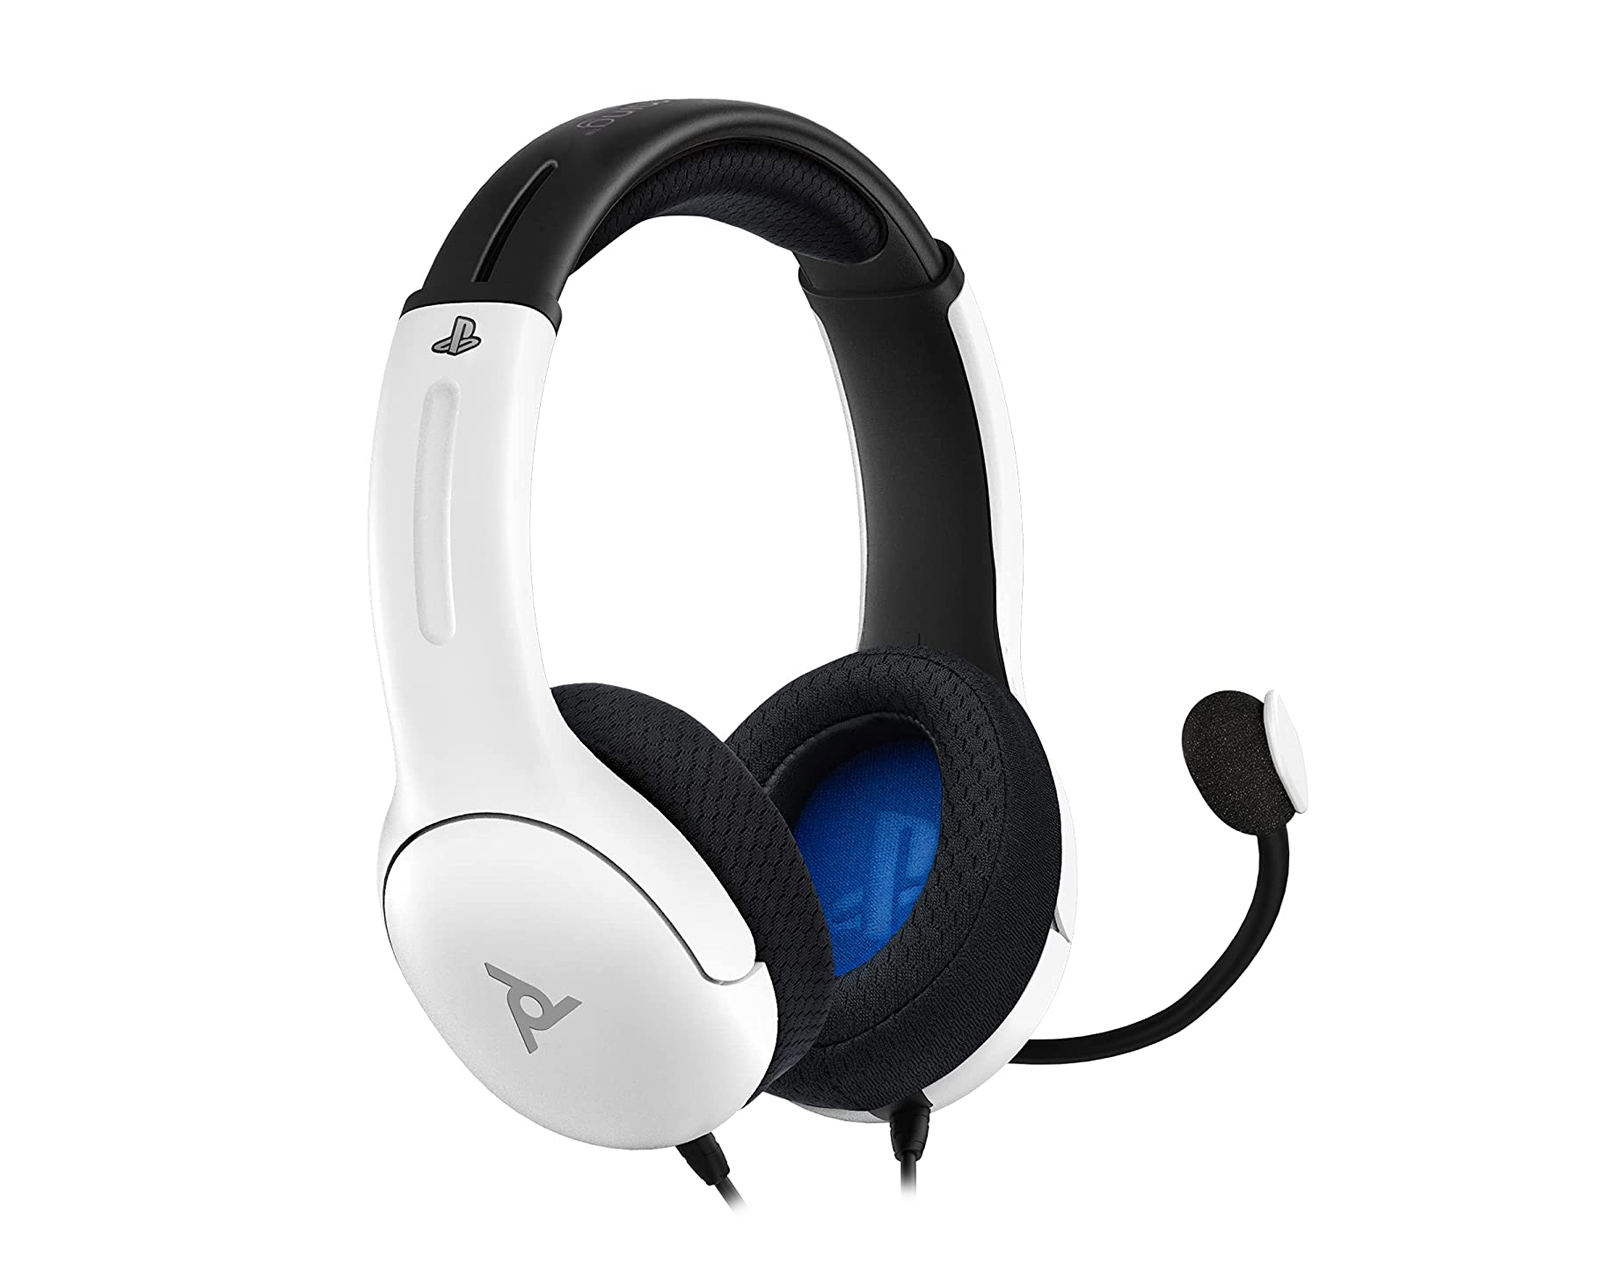 lvl40 wired stereo headset xbox one